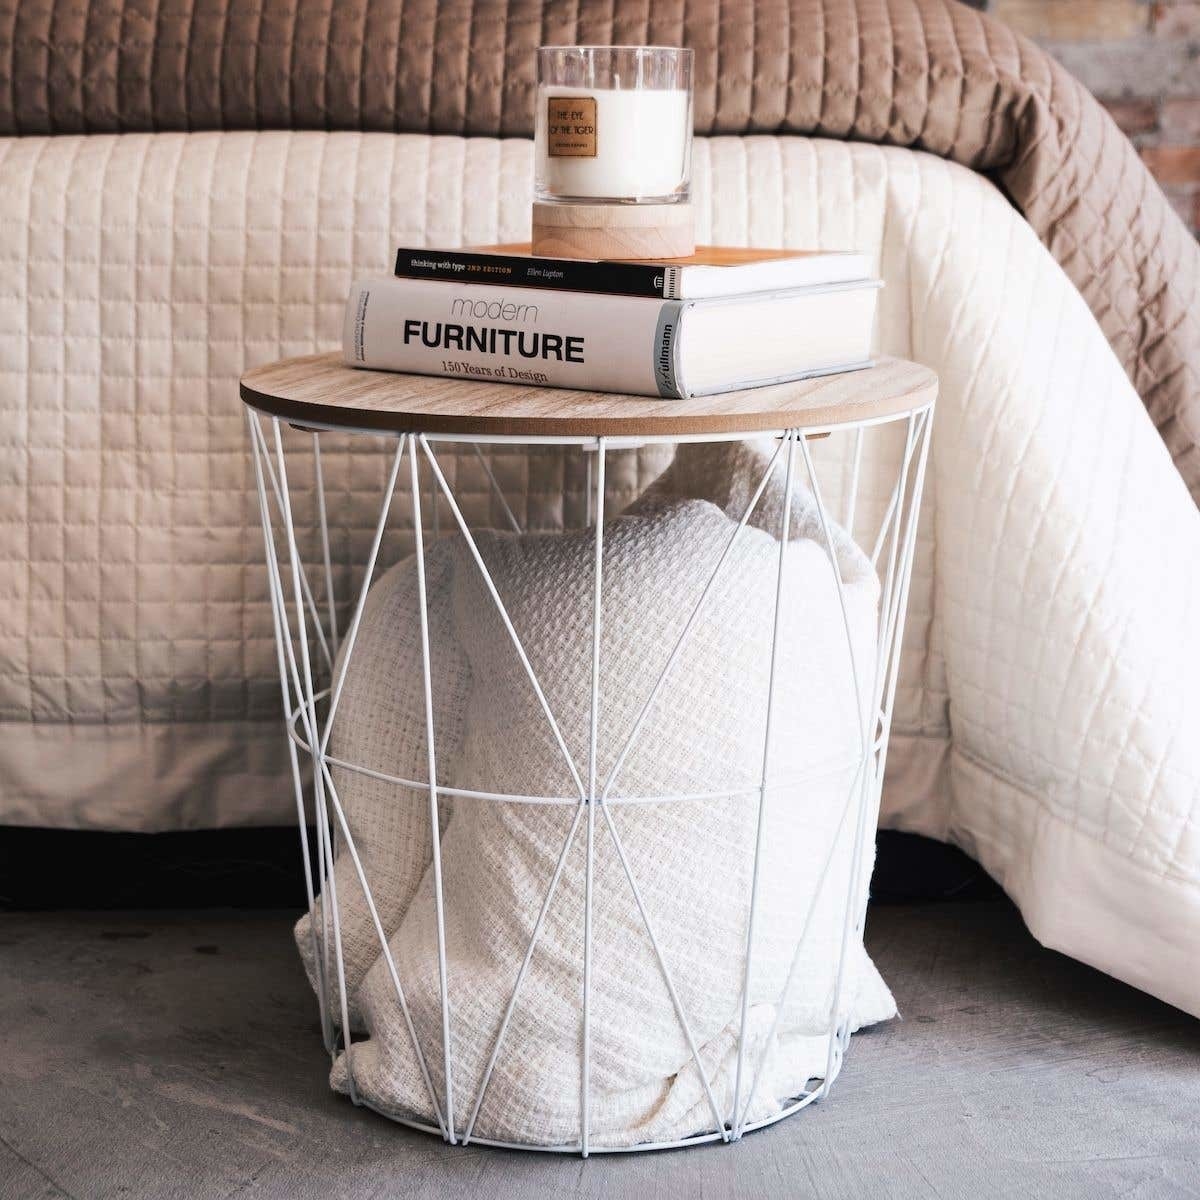 A large wiry metal basket with folded blankets and a wooden lid